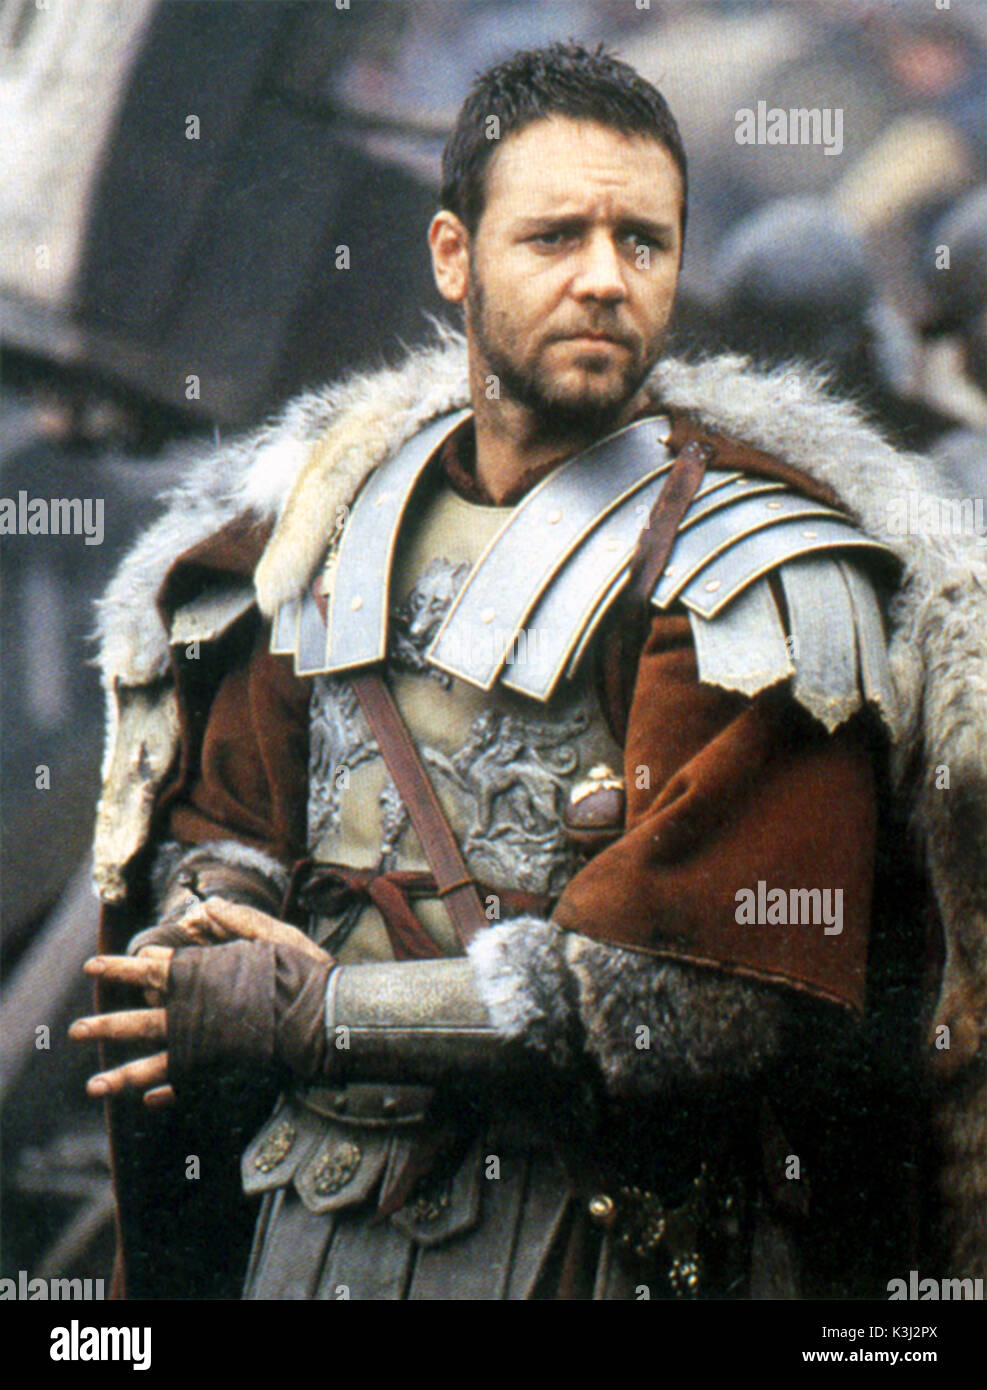 GLADIATOR RUSSEL CROWE Date : 2000 Banque D'Images